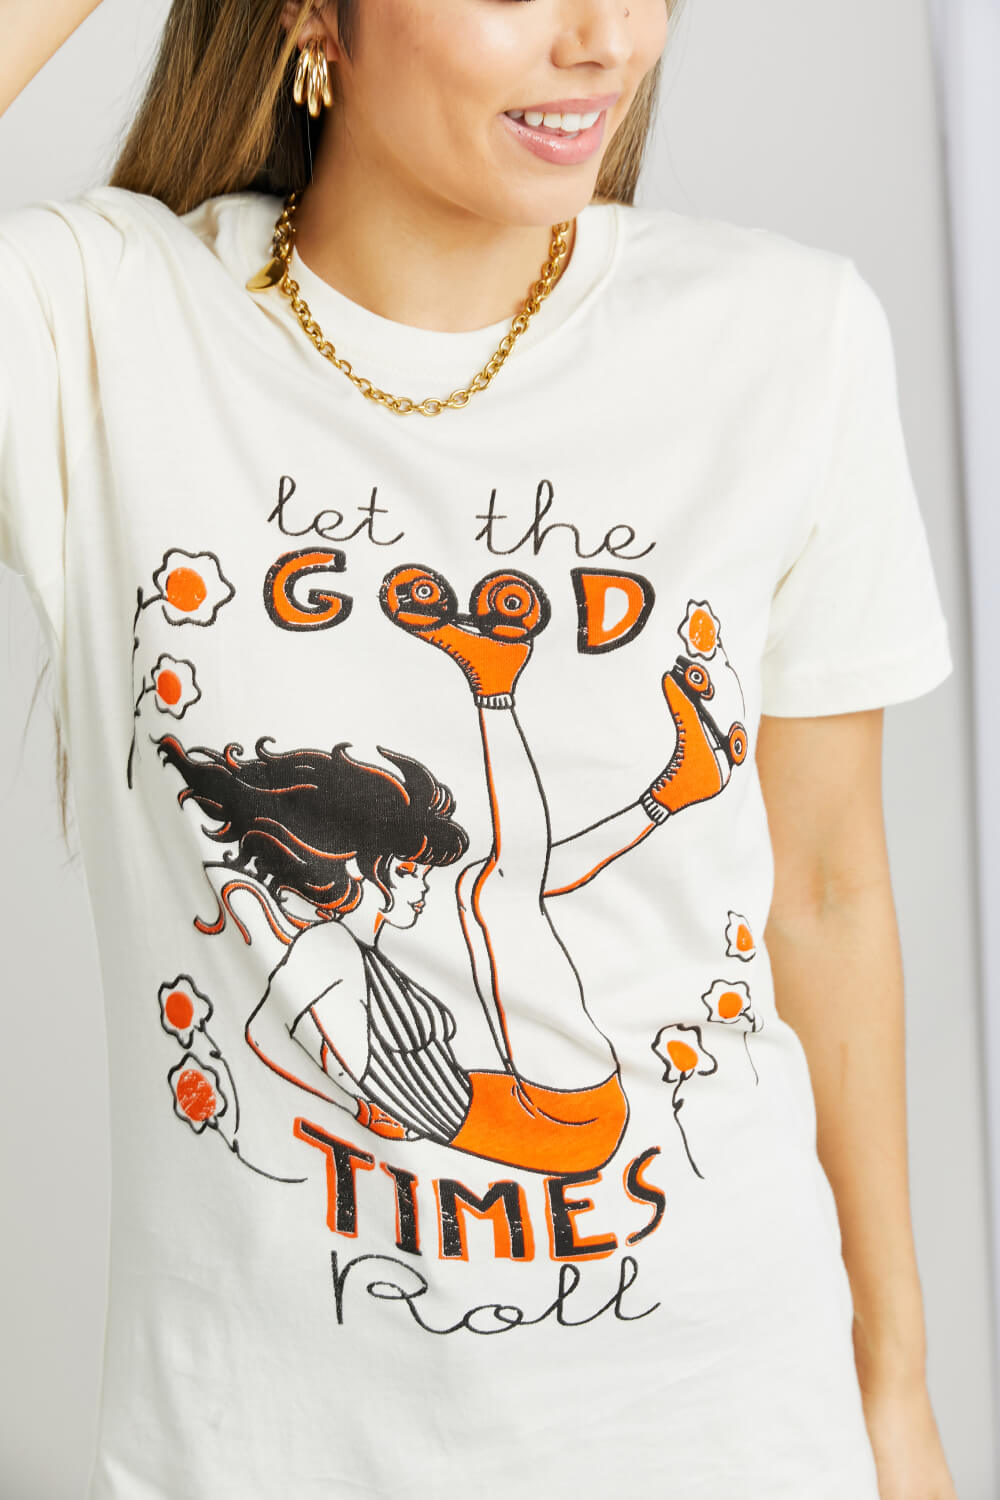 mineB Full Size LET THE GOOD TIMES ROLL Graphic Tee COCO CRESS